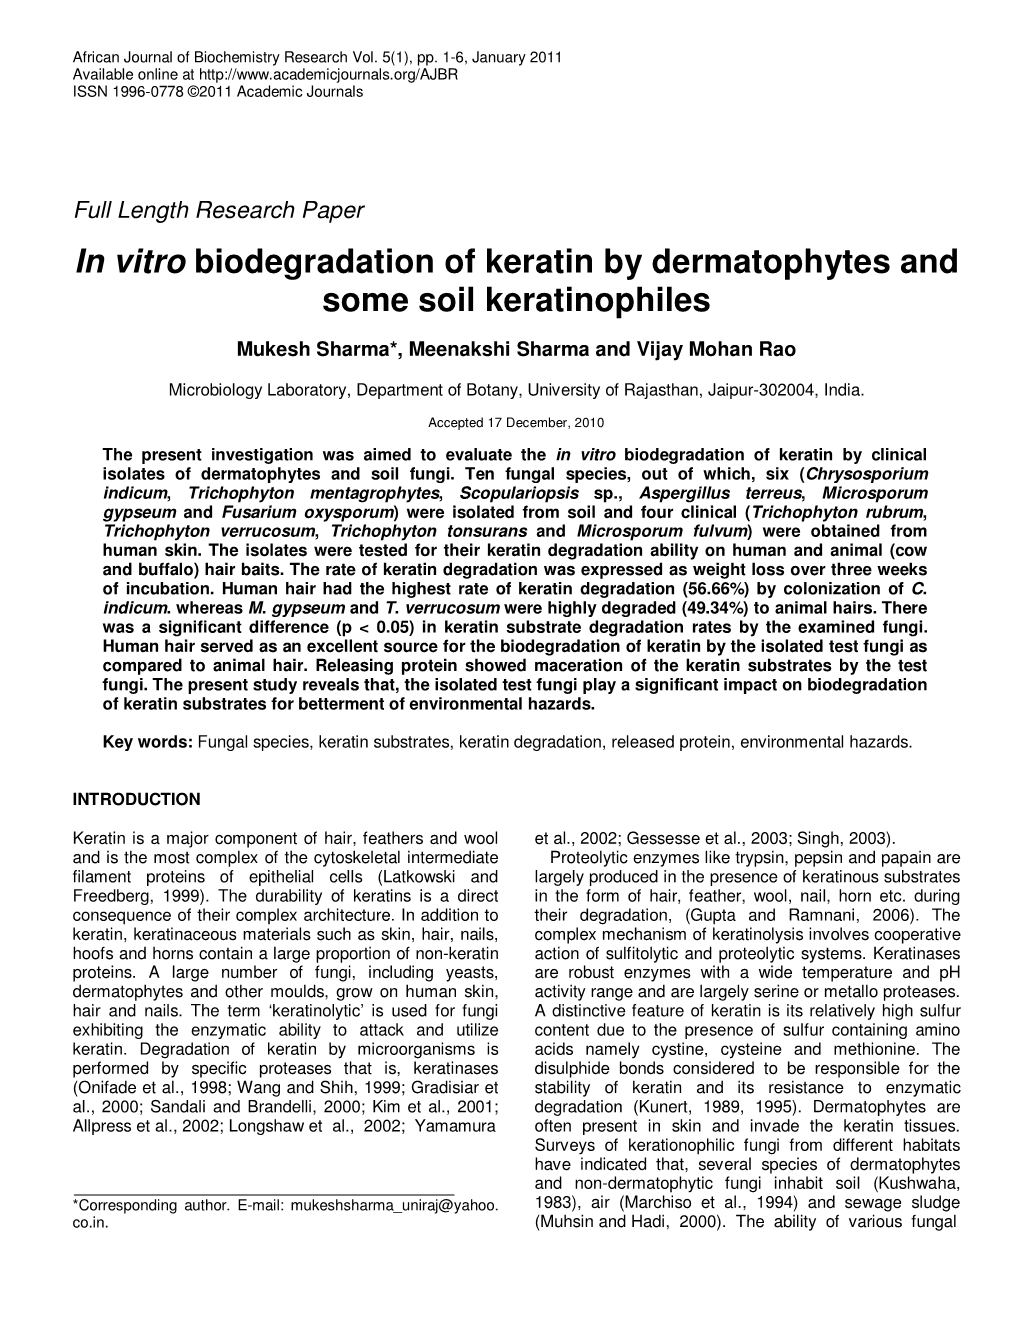 In Vitro Biodegradation of Keratin by Dermatophytes and Some Soil Keratinophiles